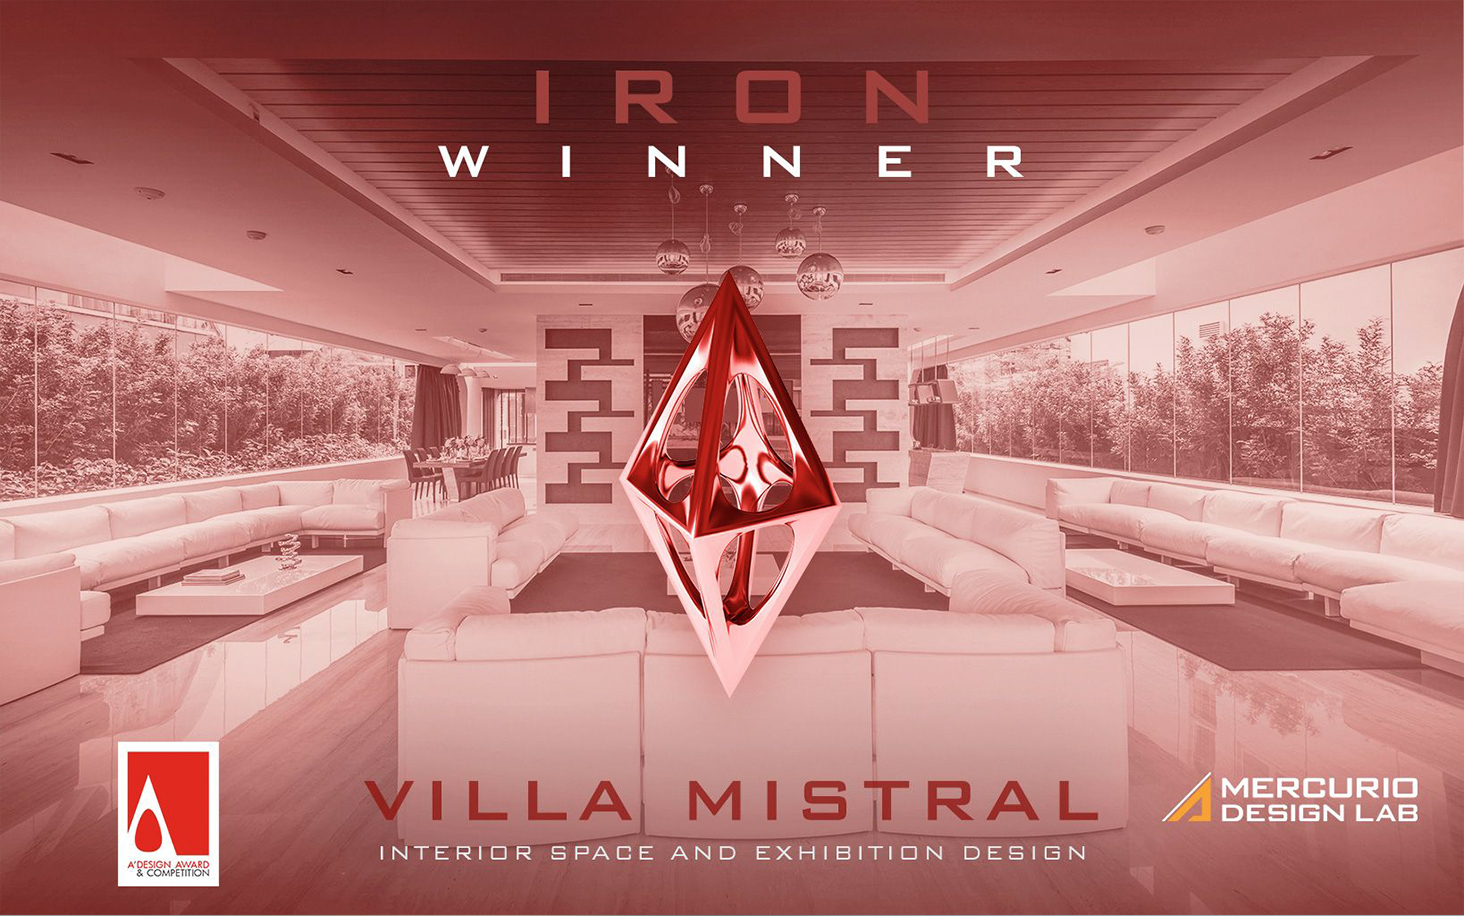 Villa Mistral Receives Honor in A’ Design Award and Competition